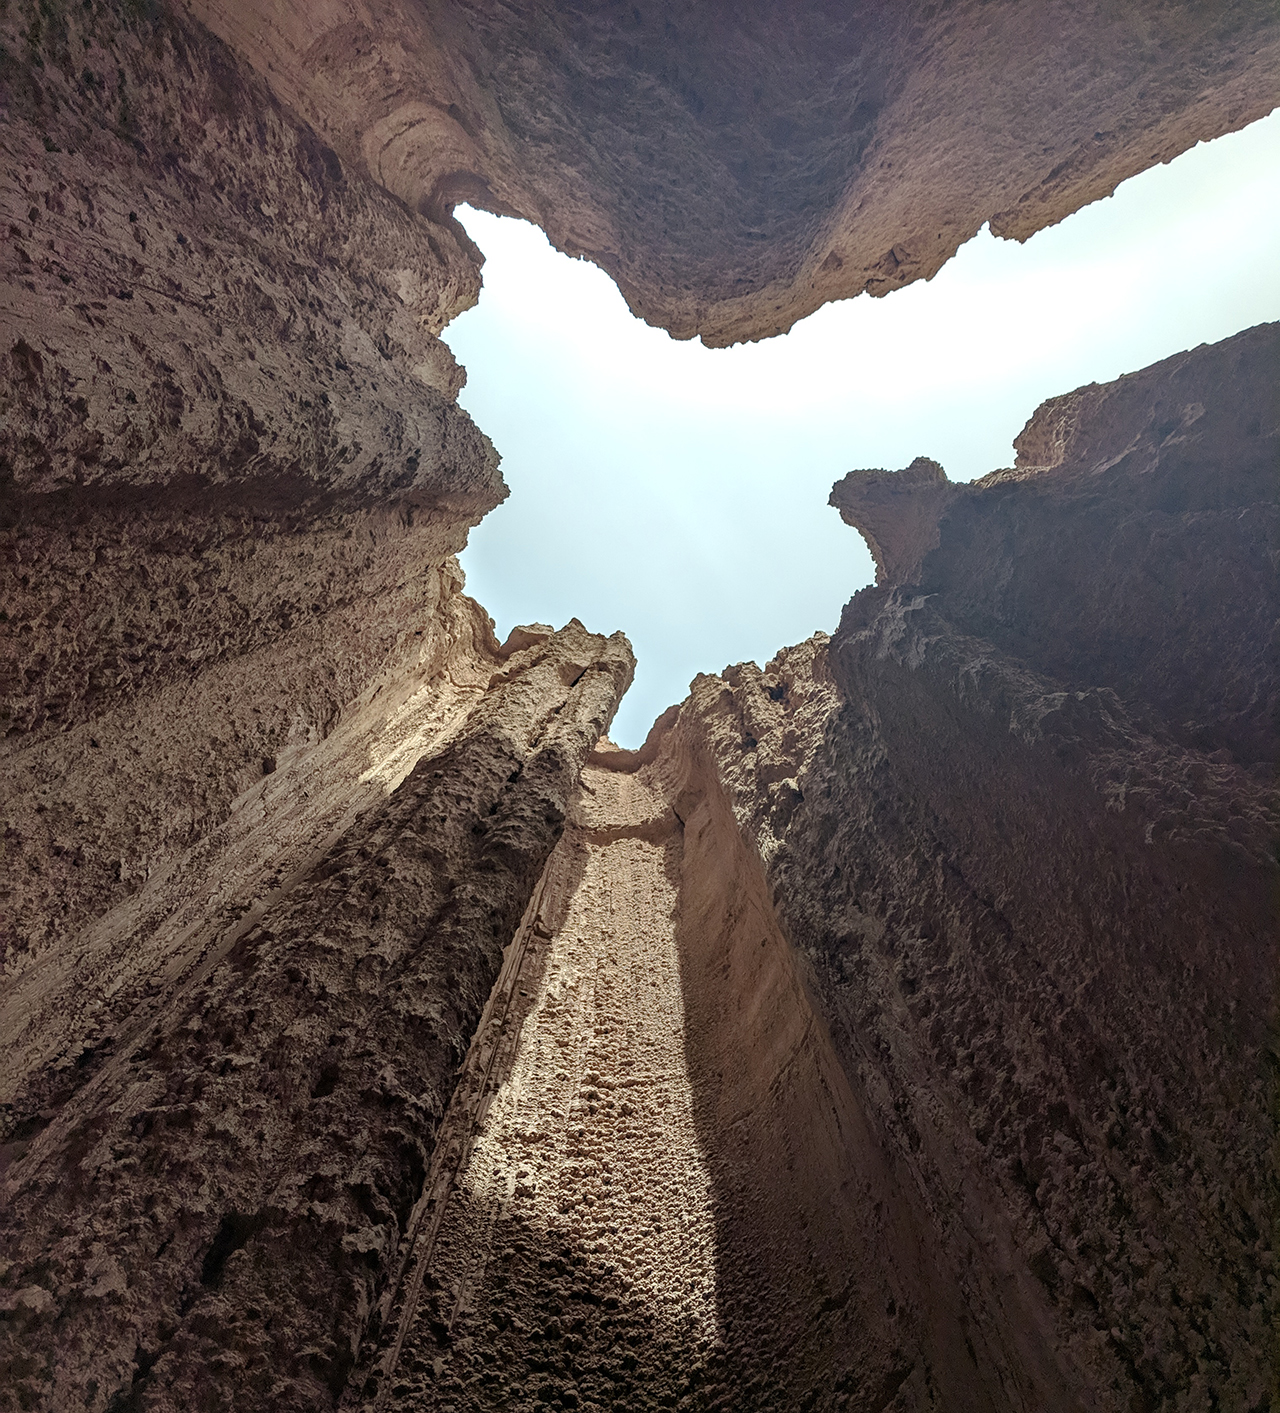 Looking upwards at the sky from the slot canyon